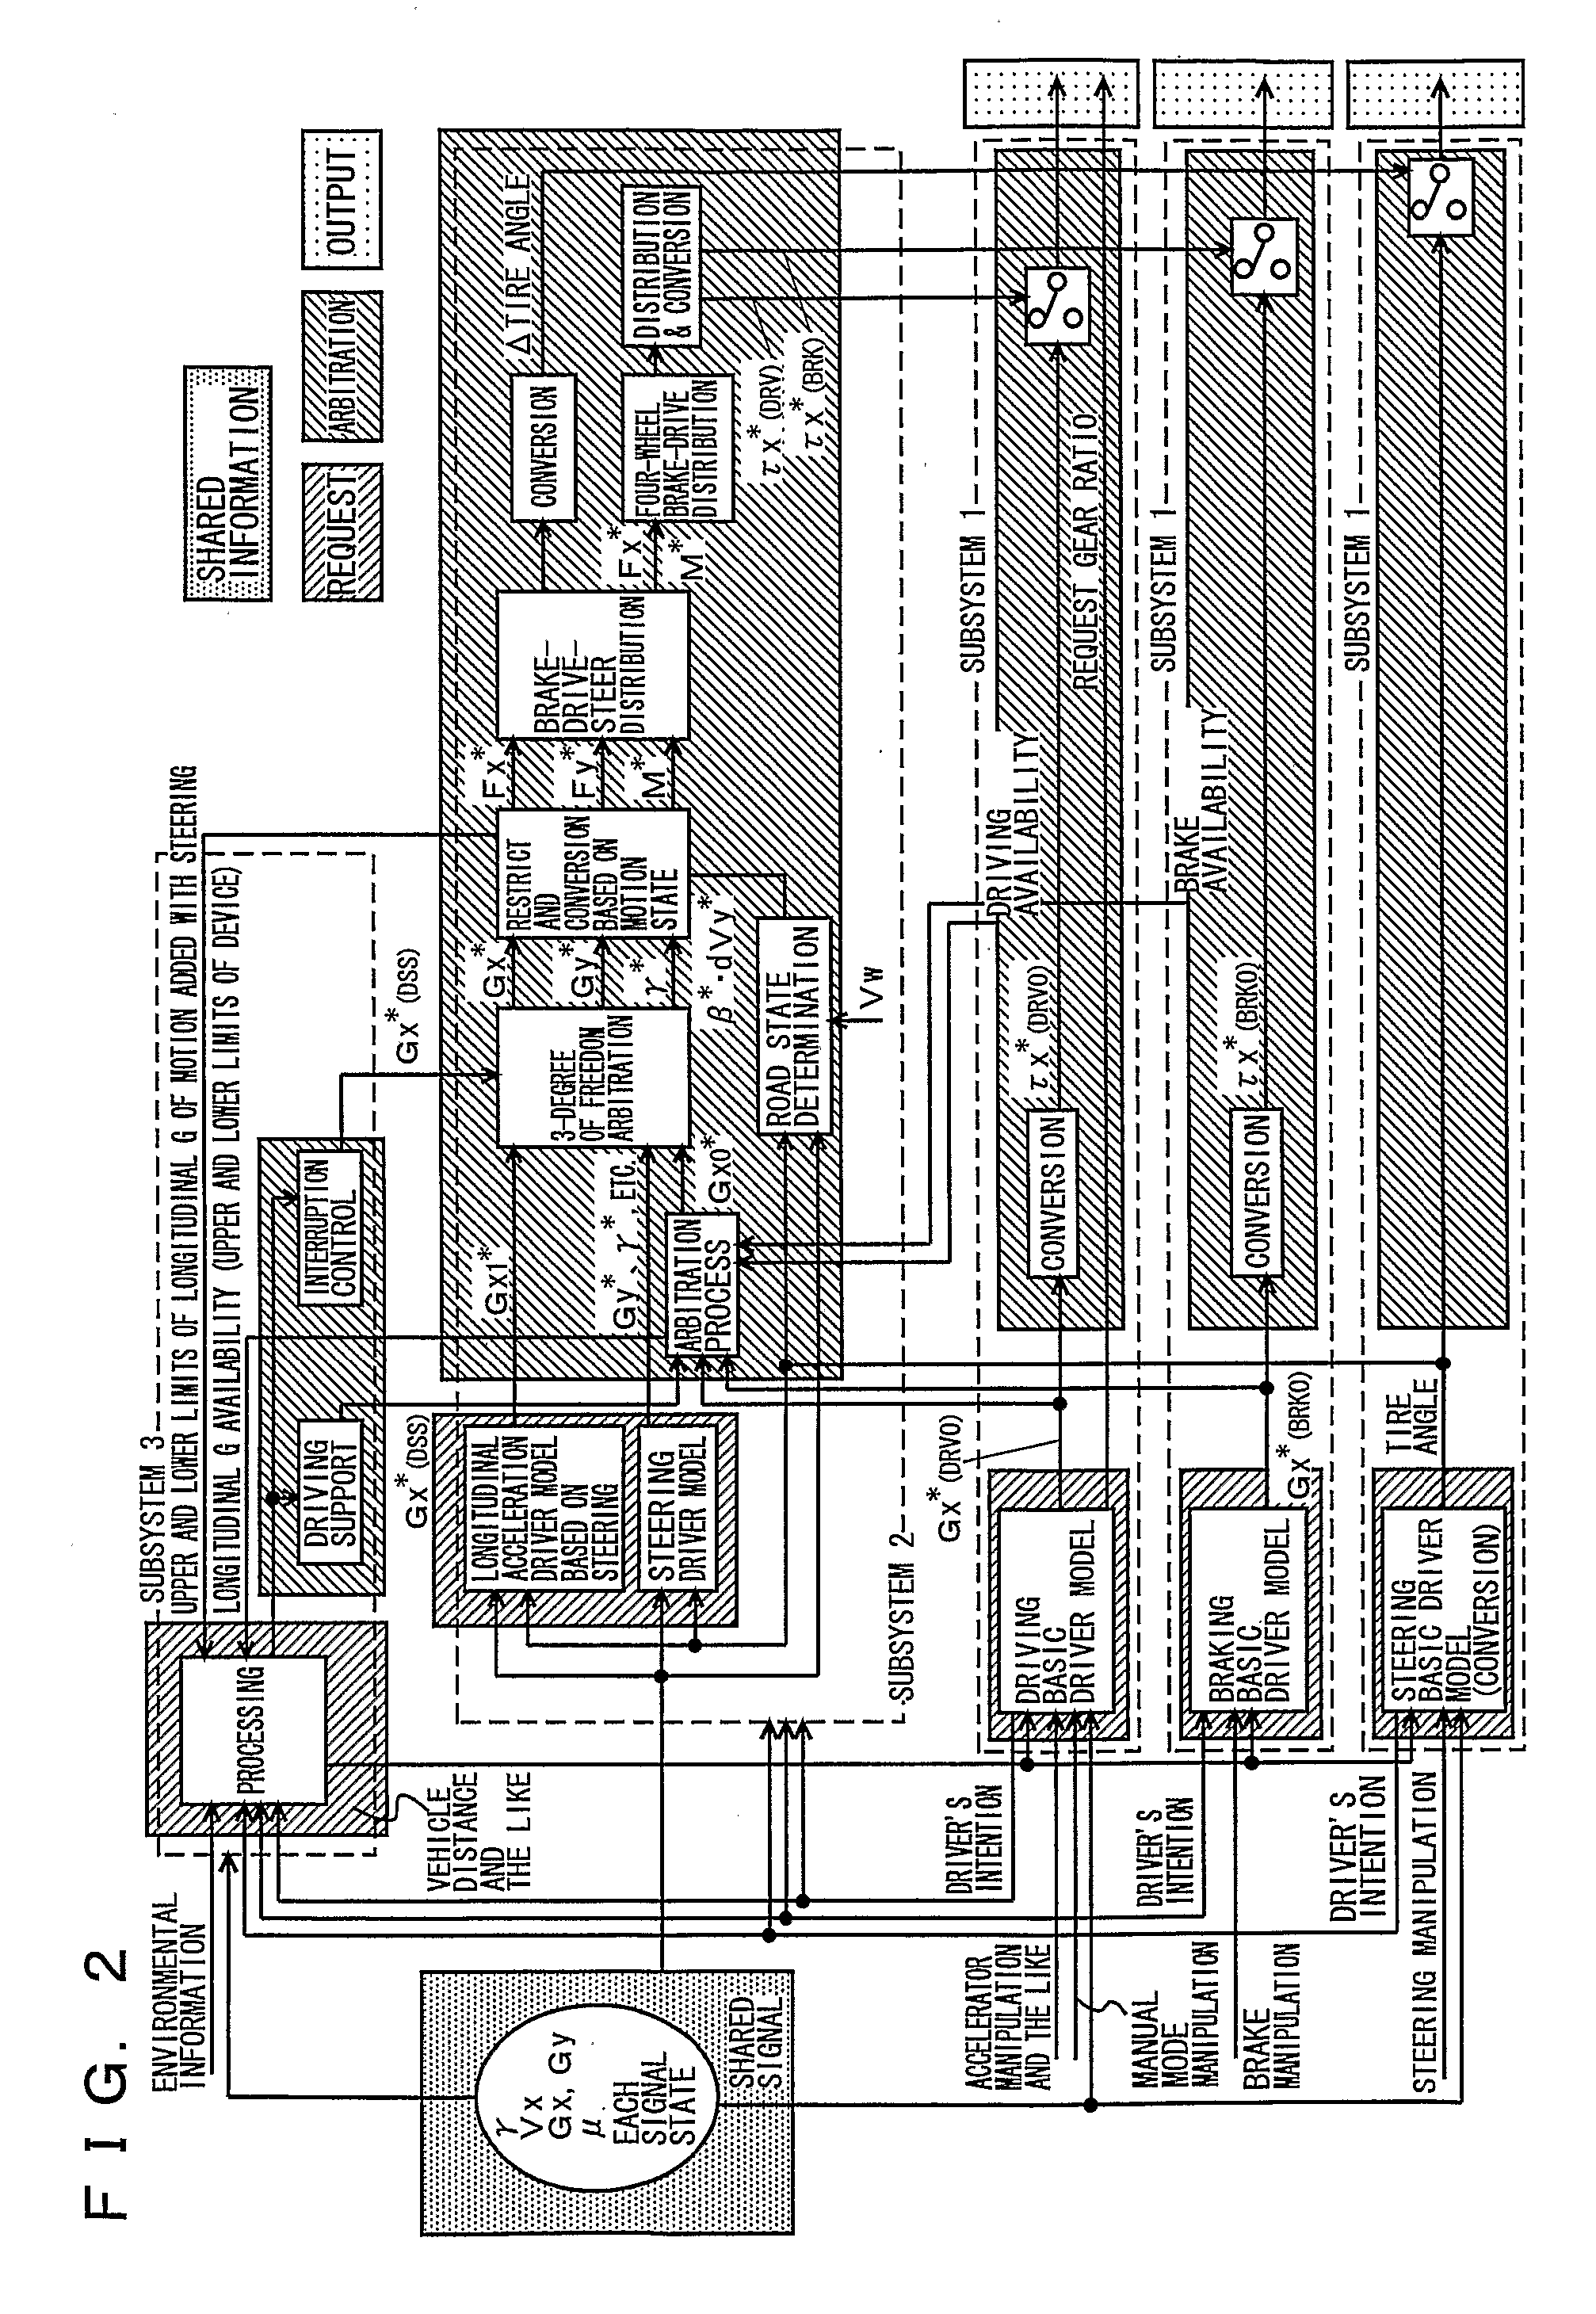 Vehicle integrated control system